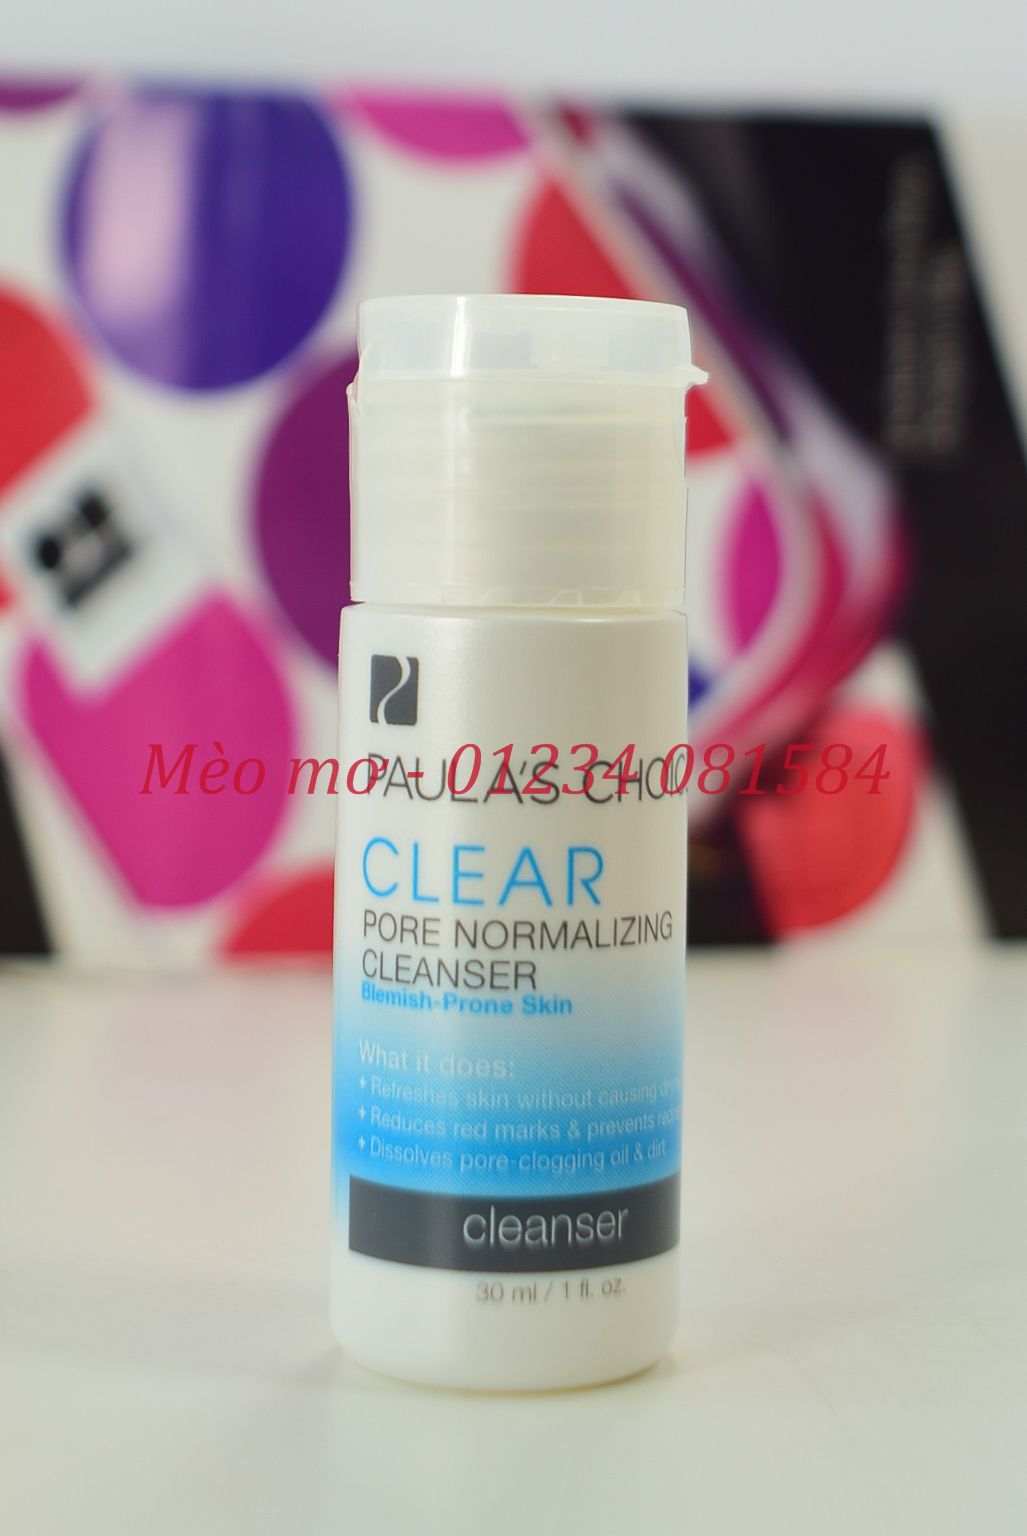 Paula's Choice CLEAR PORE NORMALIZING CLEANSER